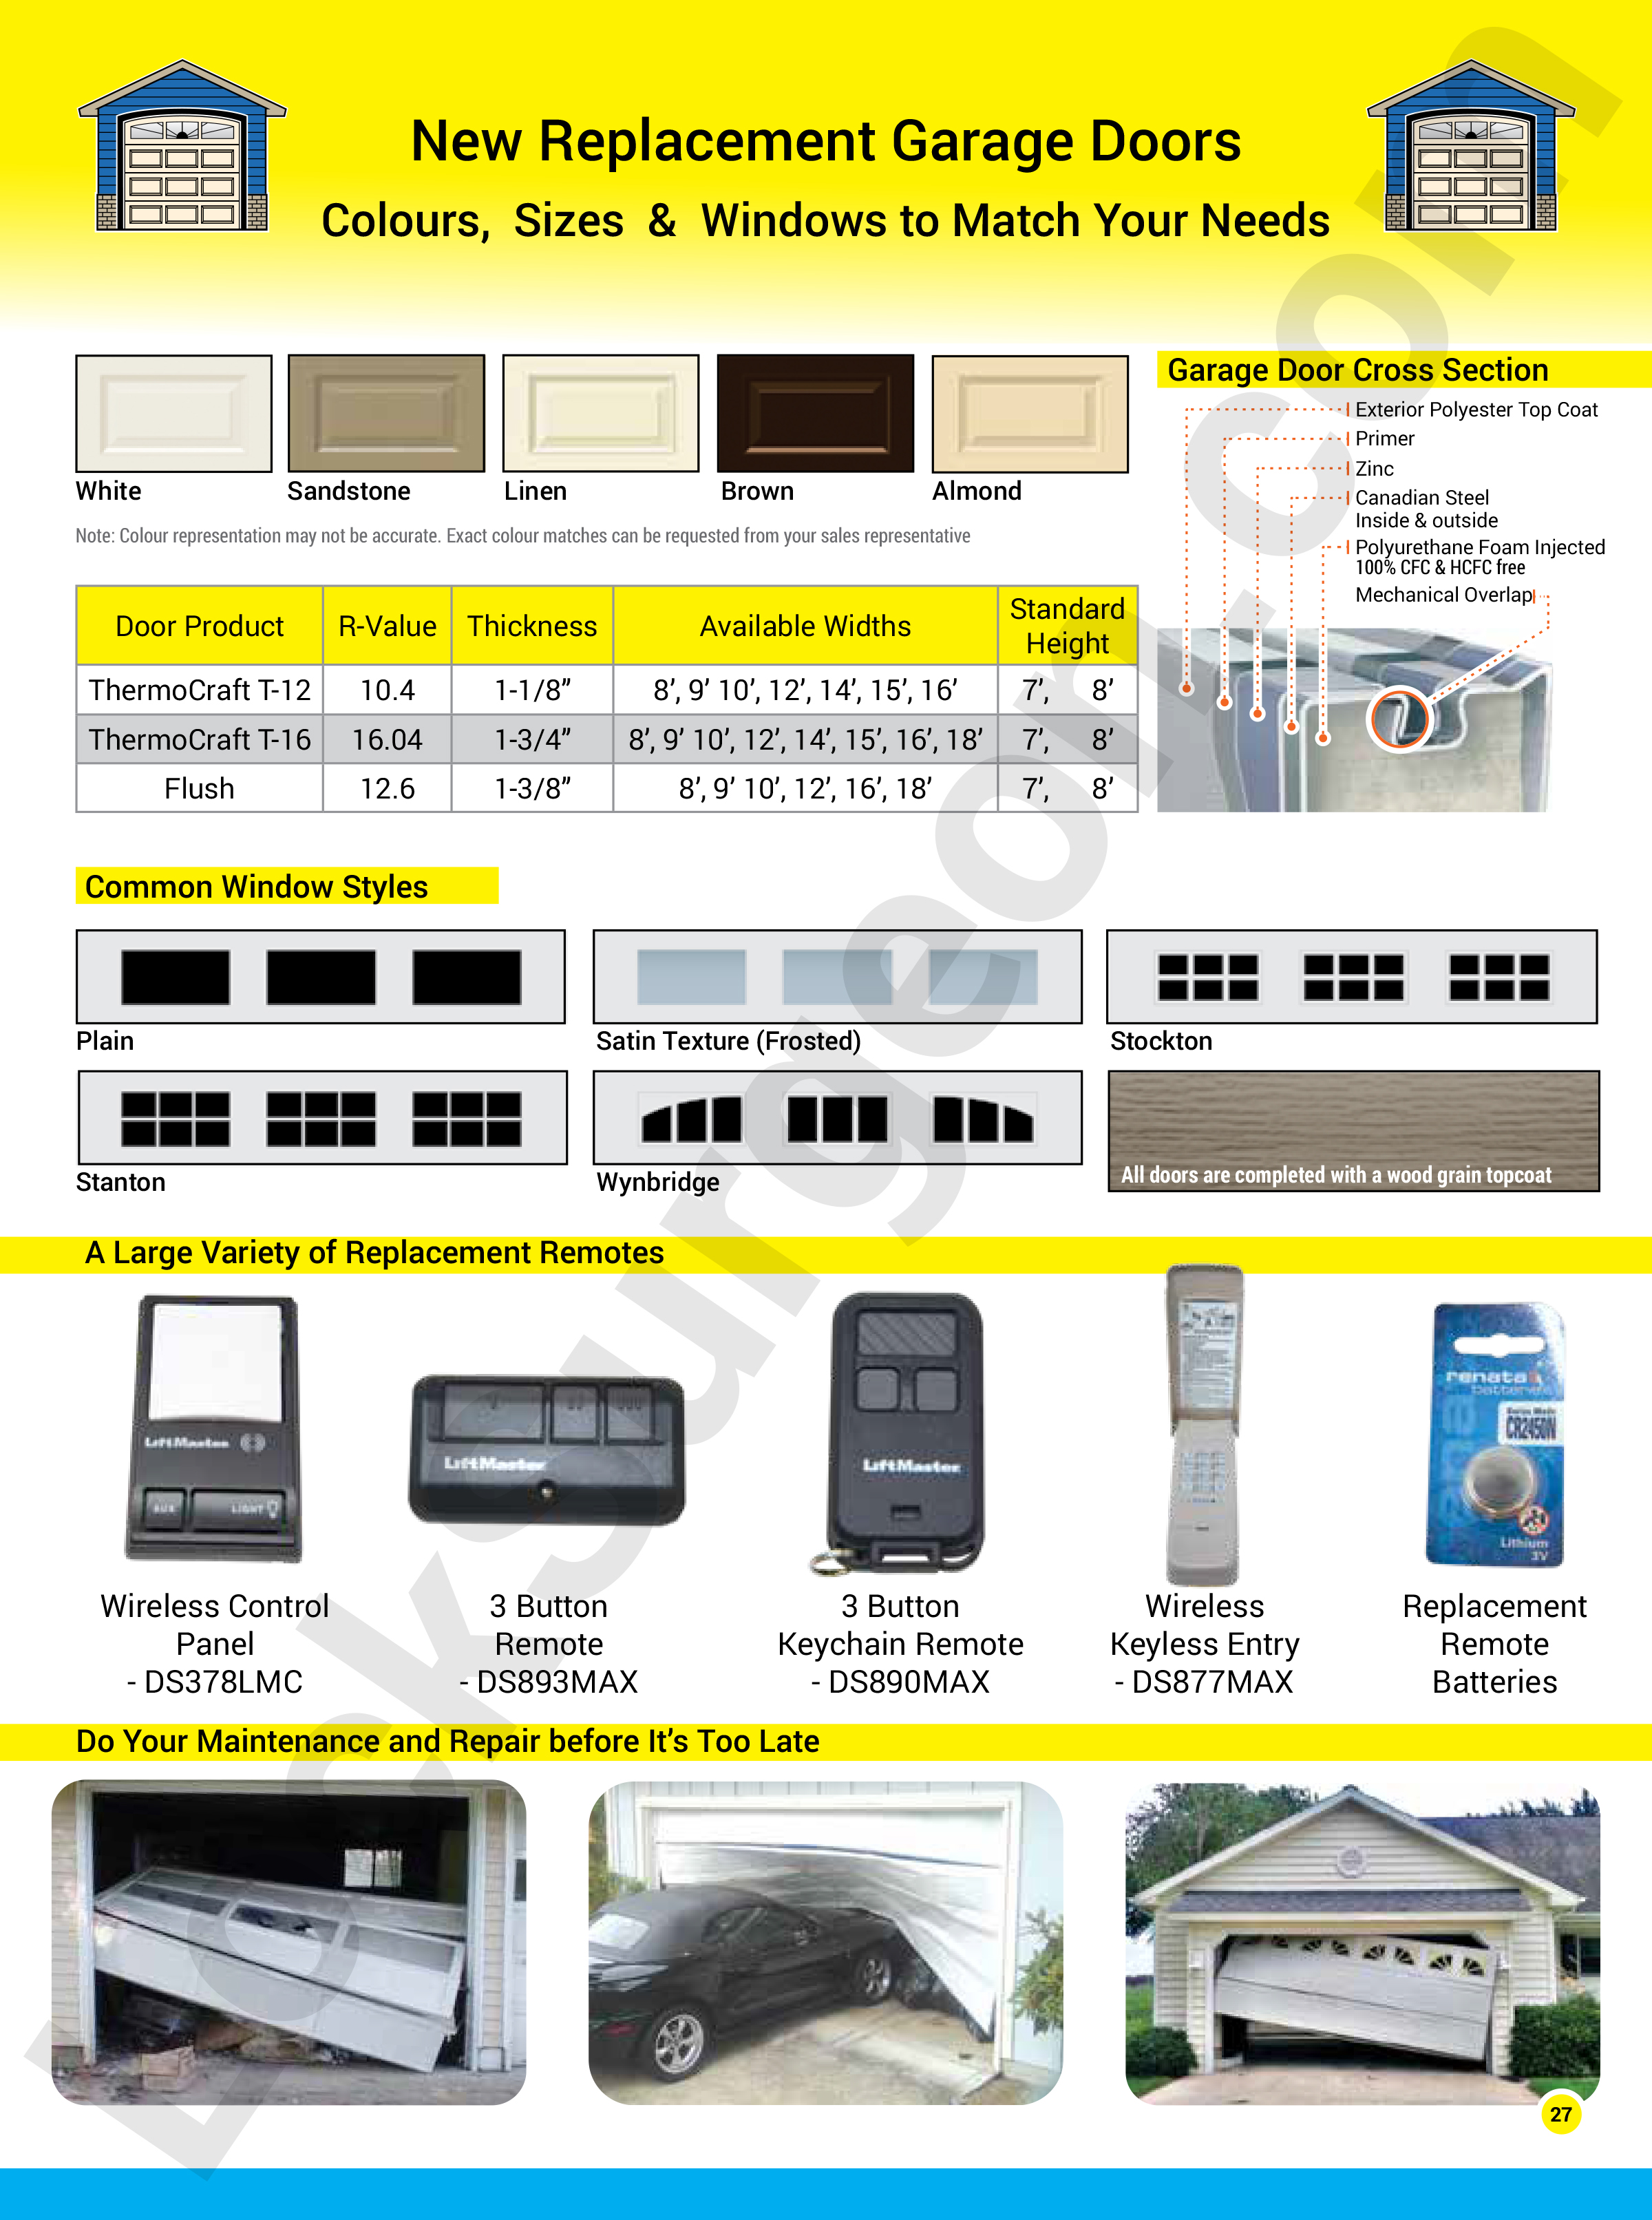 Lock Surgeon and Door Surgeon supply and install new replacement garage door and overhead doors. Colours, sizes & windows to match your needs. Lock Surgeon carry a large variety of replacement remotes, openers, panels, hinges, cables, photo eyes, rollers, drums, and weathersripping.